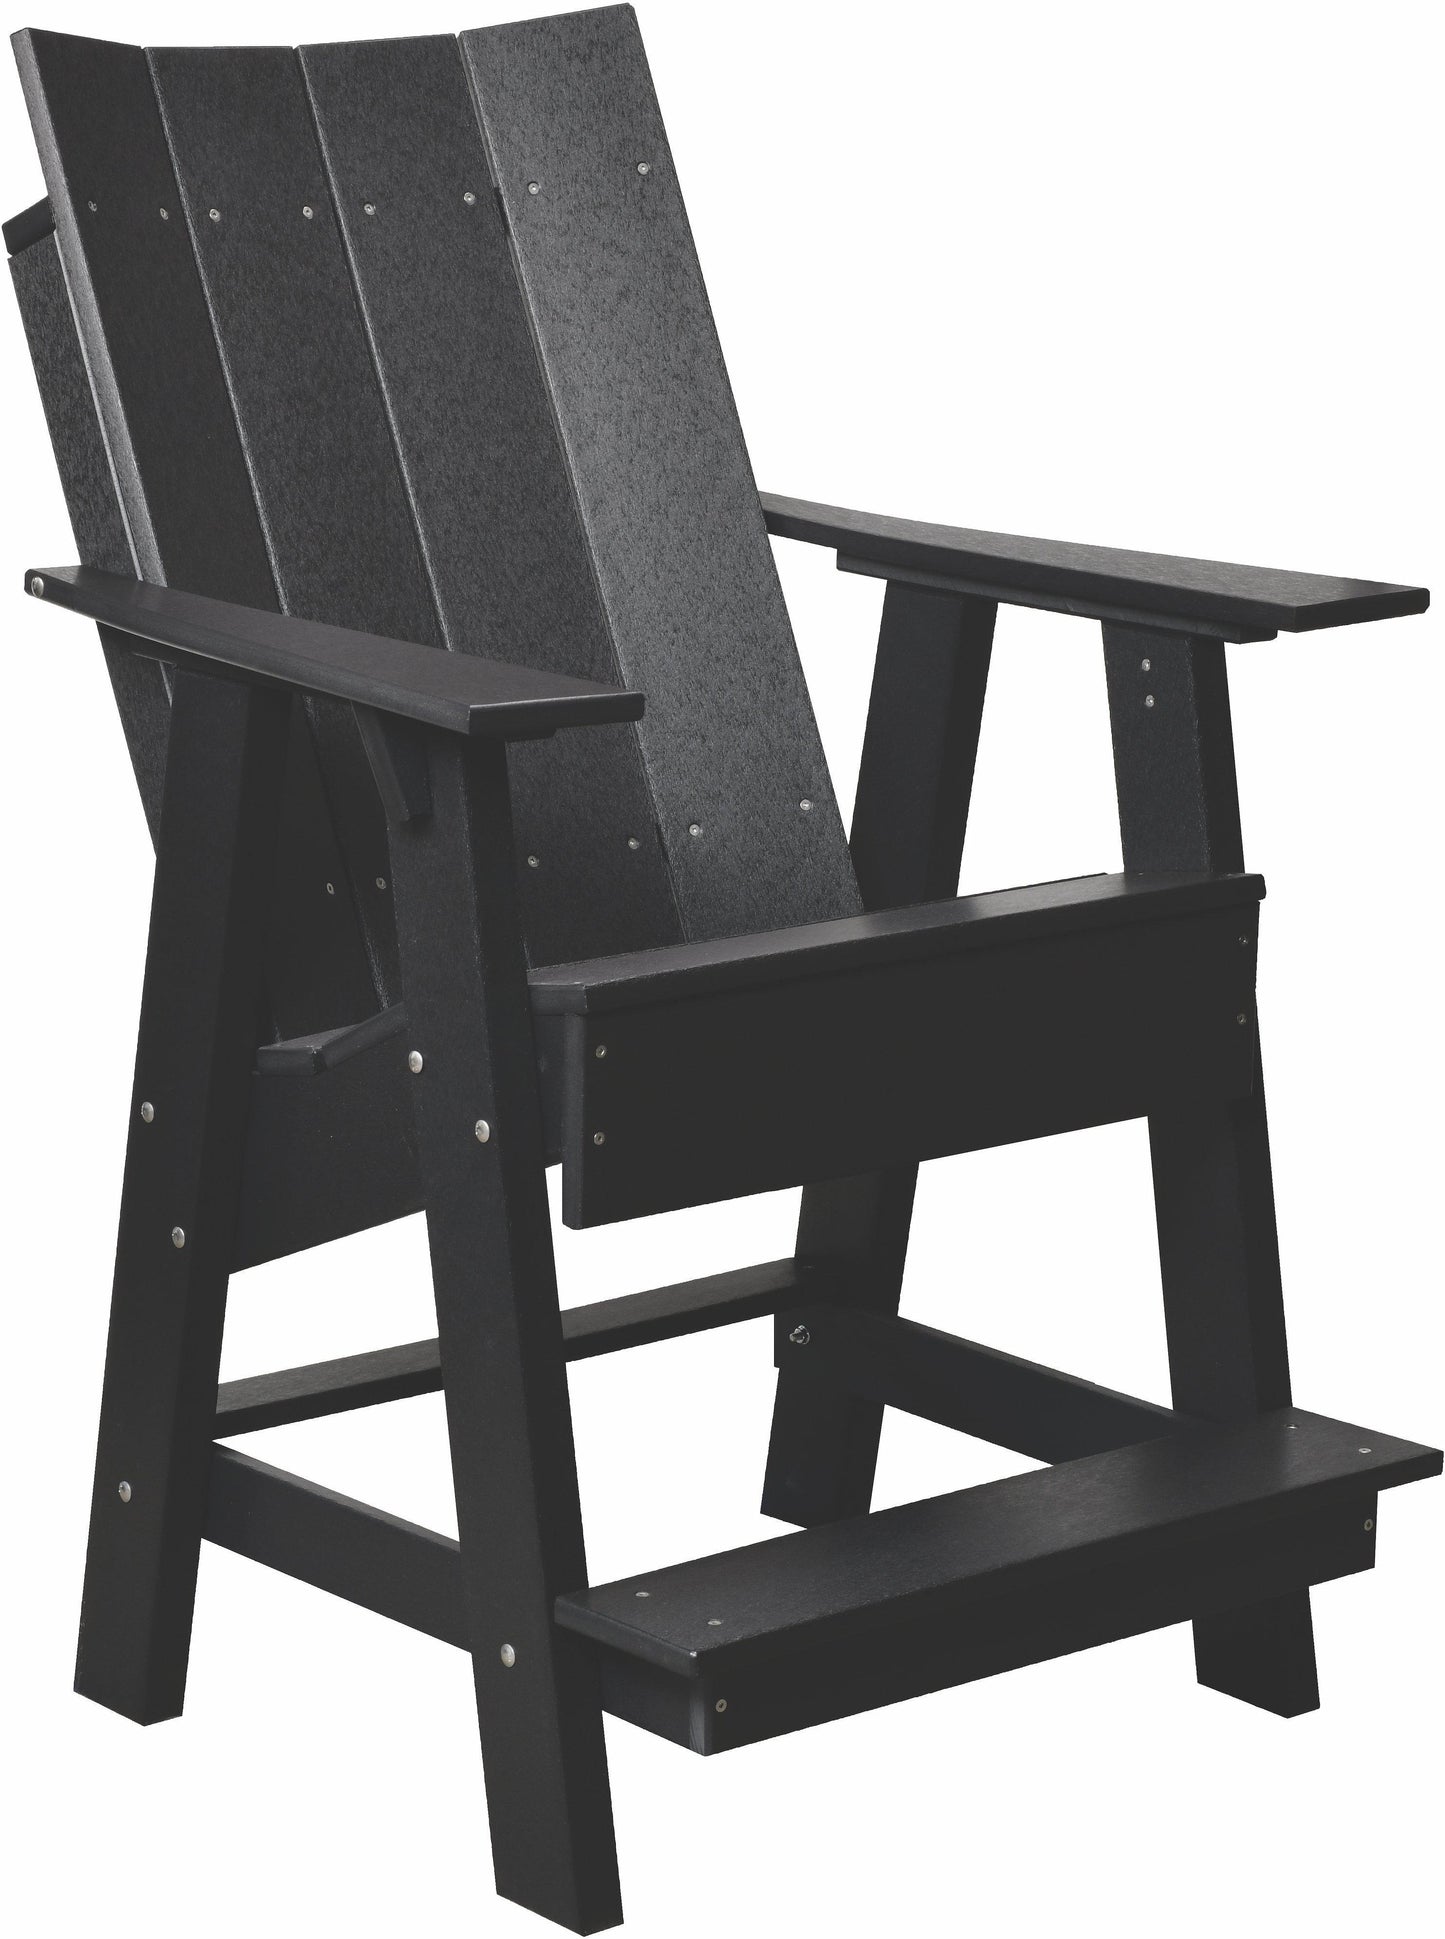 Wildridge Recycled Plastic Outdoor Contemporary Adirondack Balcony Chair  (COUNTER HEIGHT) (QUICK SHIP) - LEAD TIME TO SHIP 3 TO 4 BUSINESS DAYS